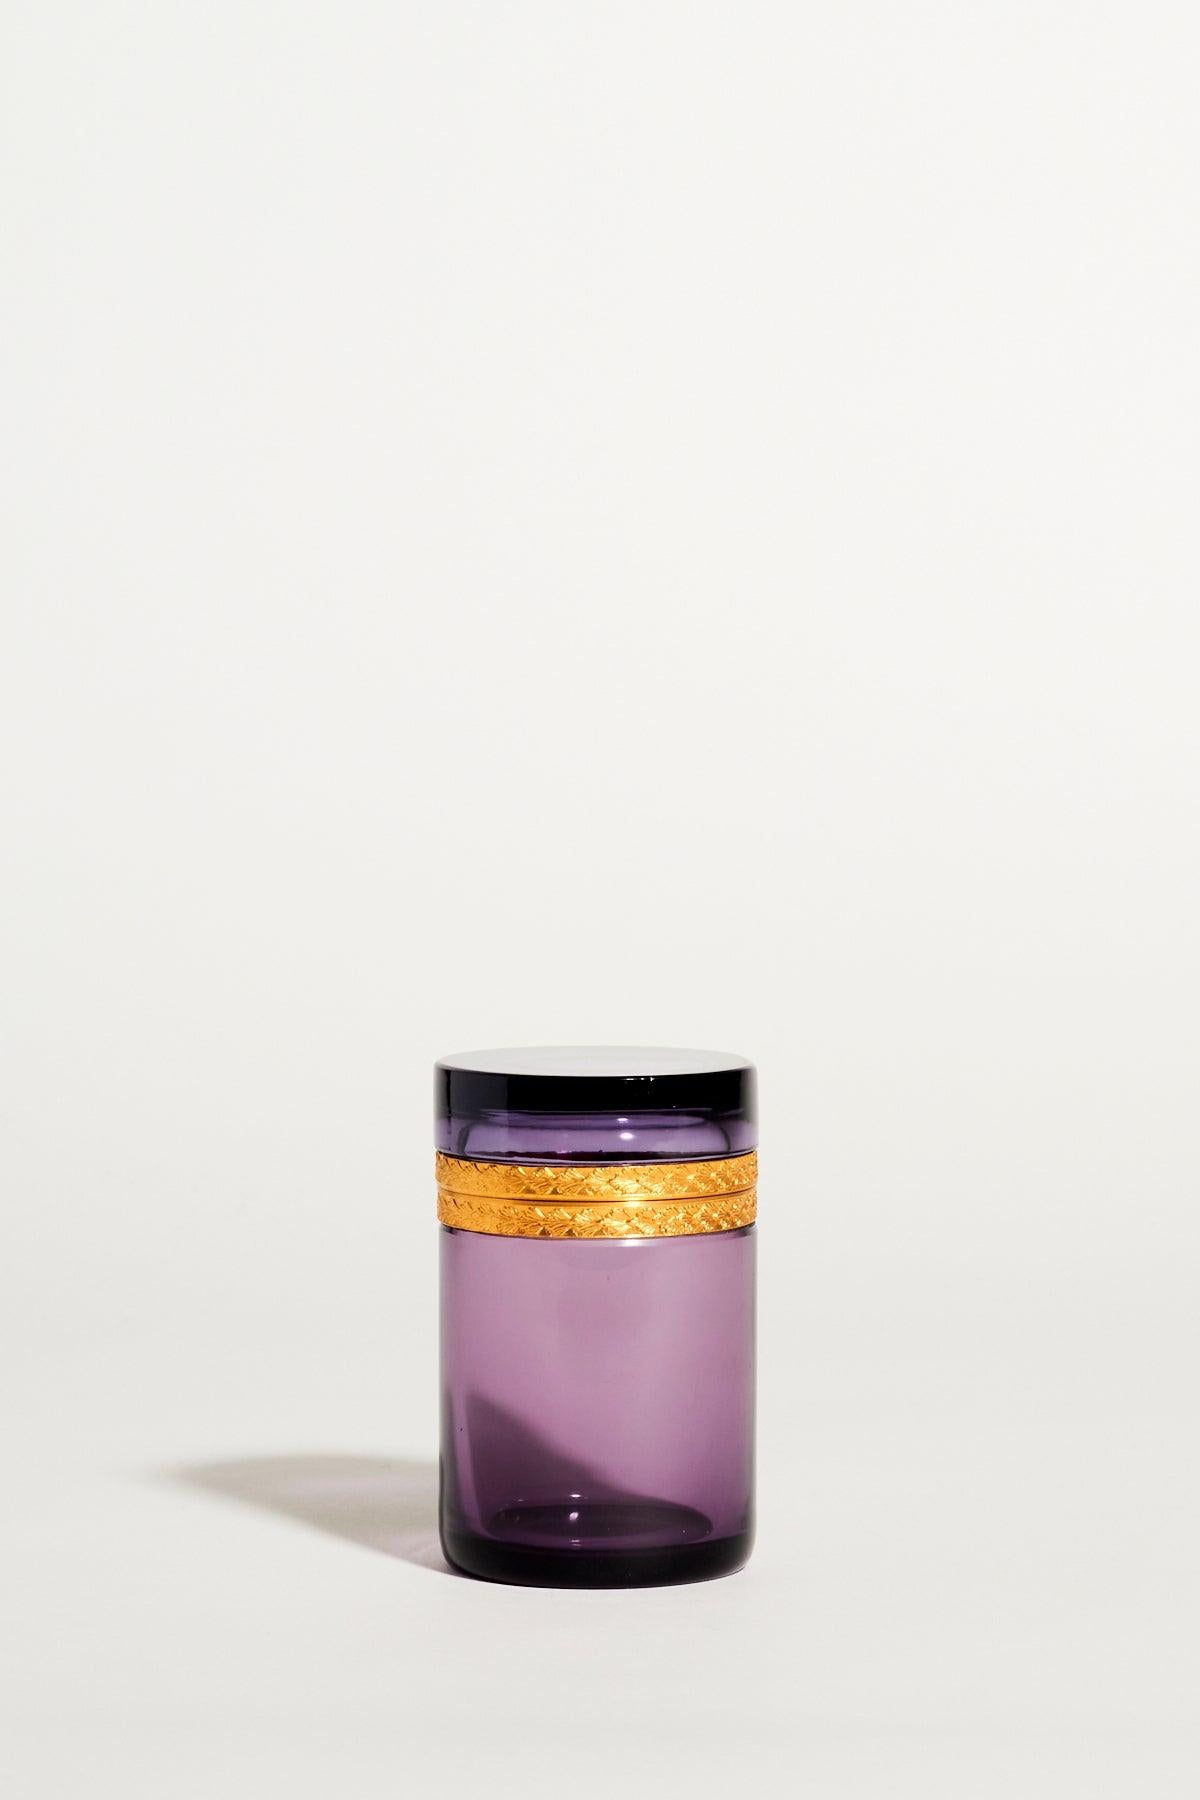 1940s French amethyst glass jewelry pot with hinged lid and finely detailed shell pattern on the gold trim.